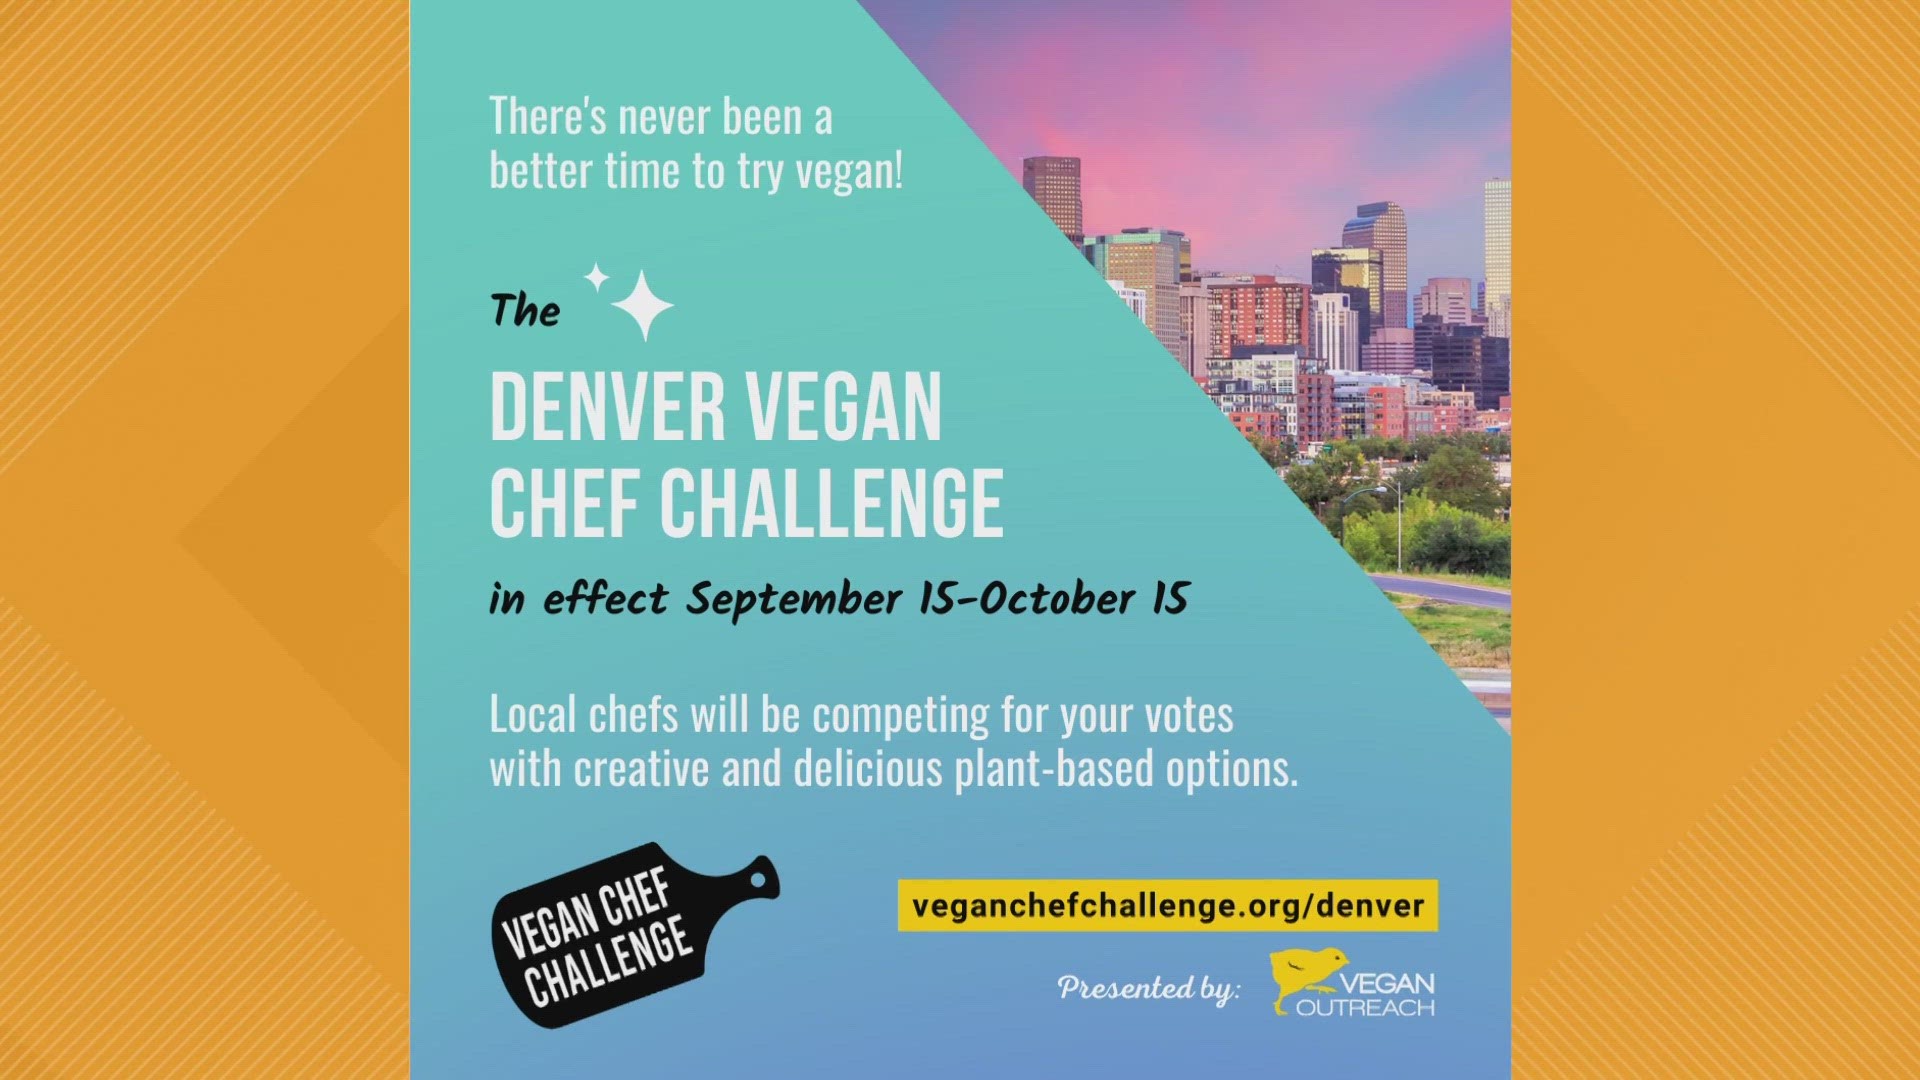 It's a month long challenge where local chefs will create new vegan menu items and make it available in local communities.